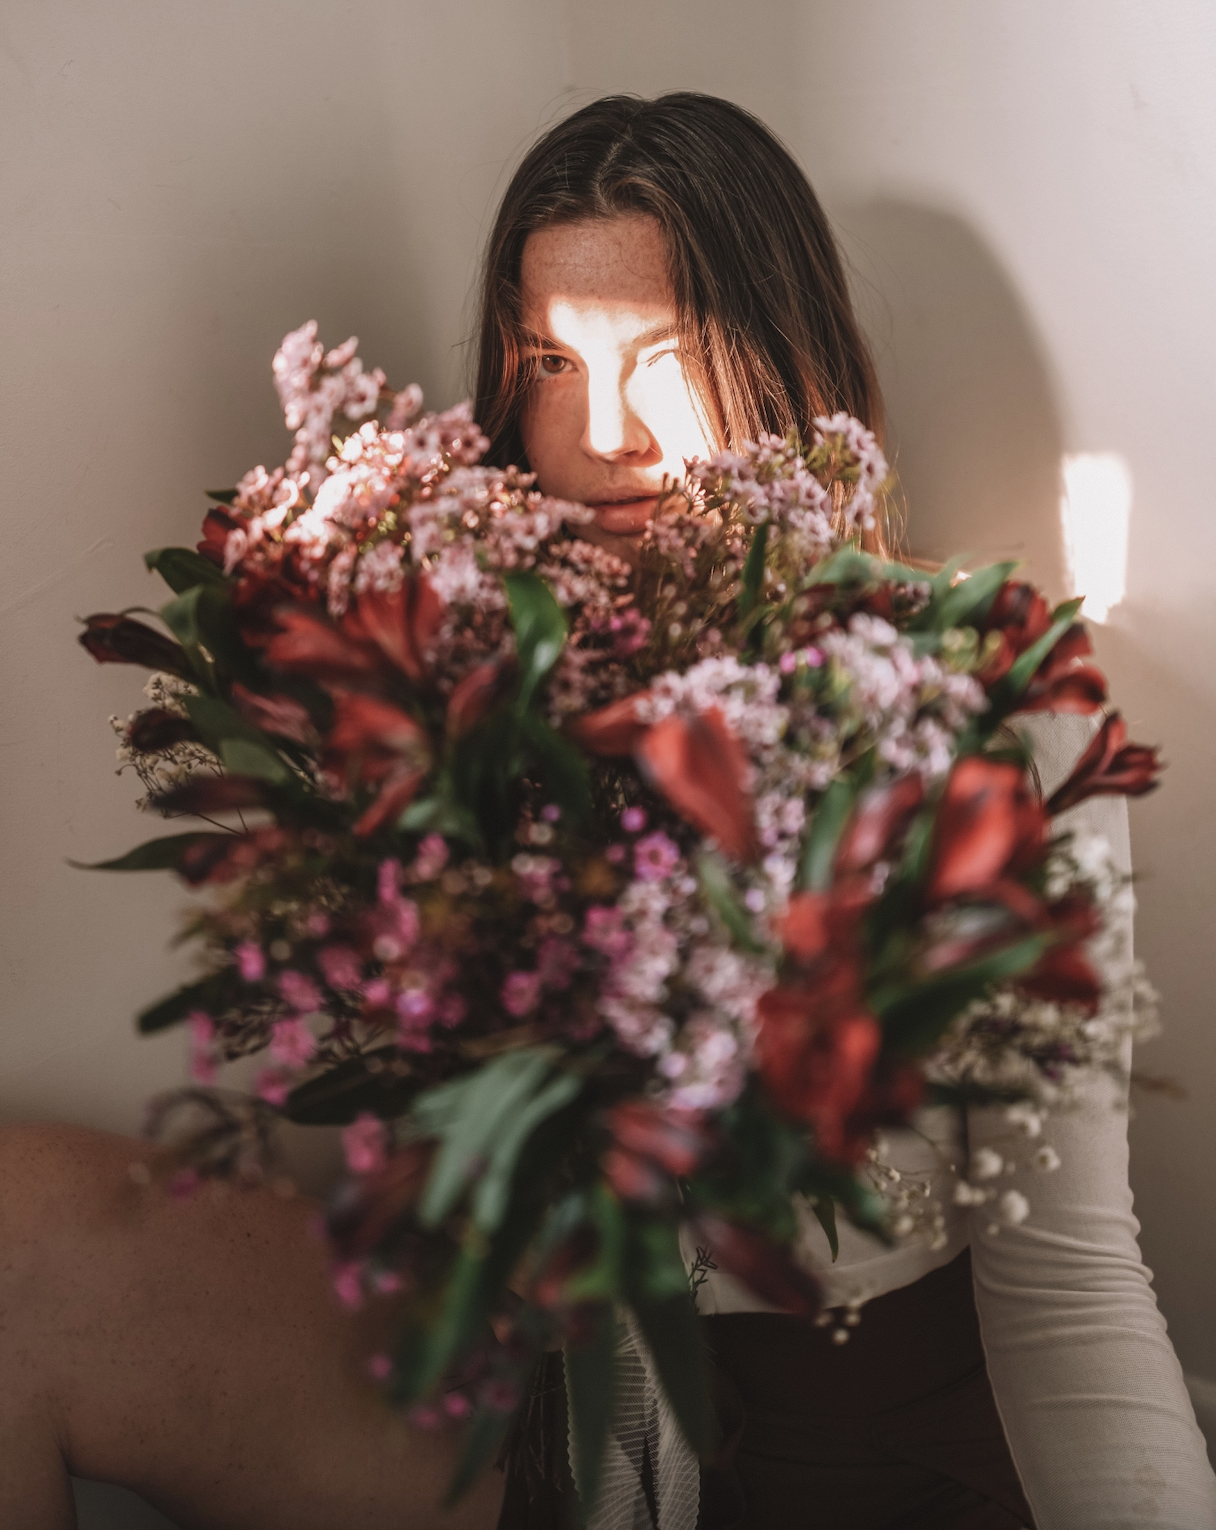 girl holding bouquet